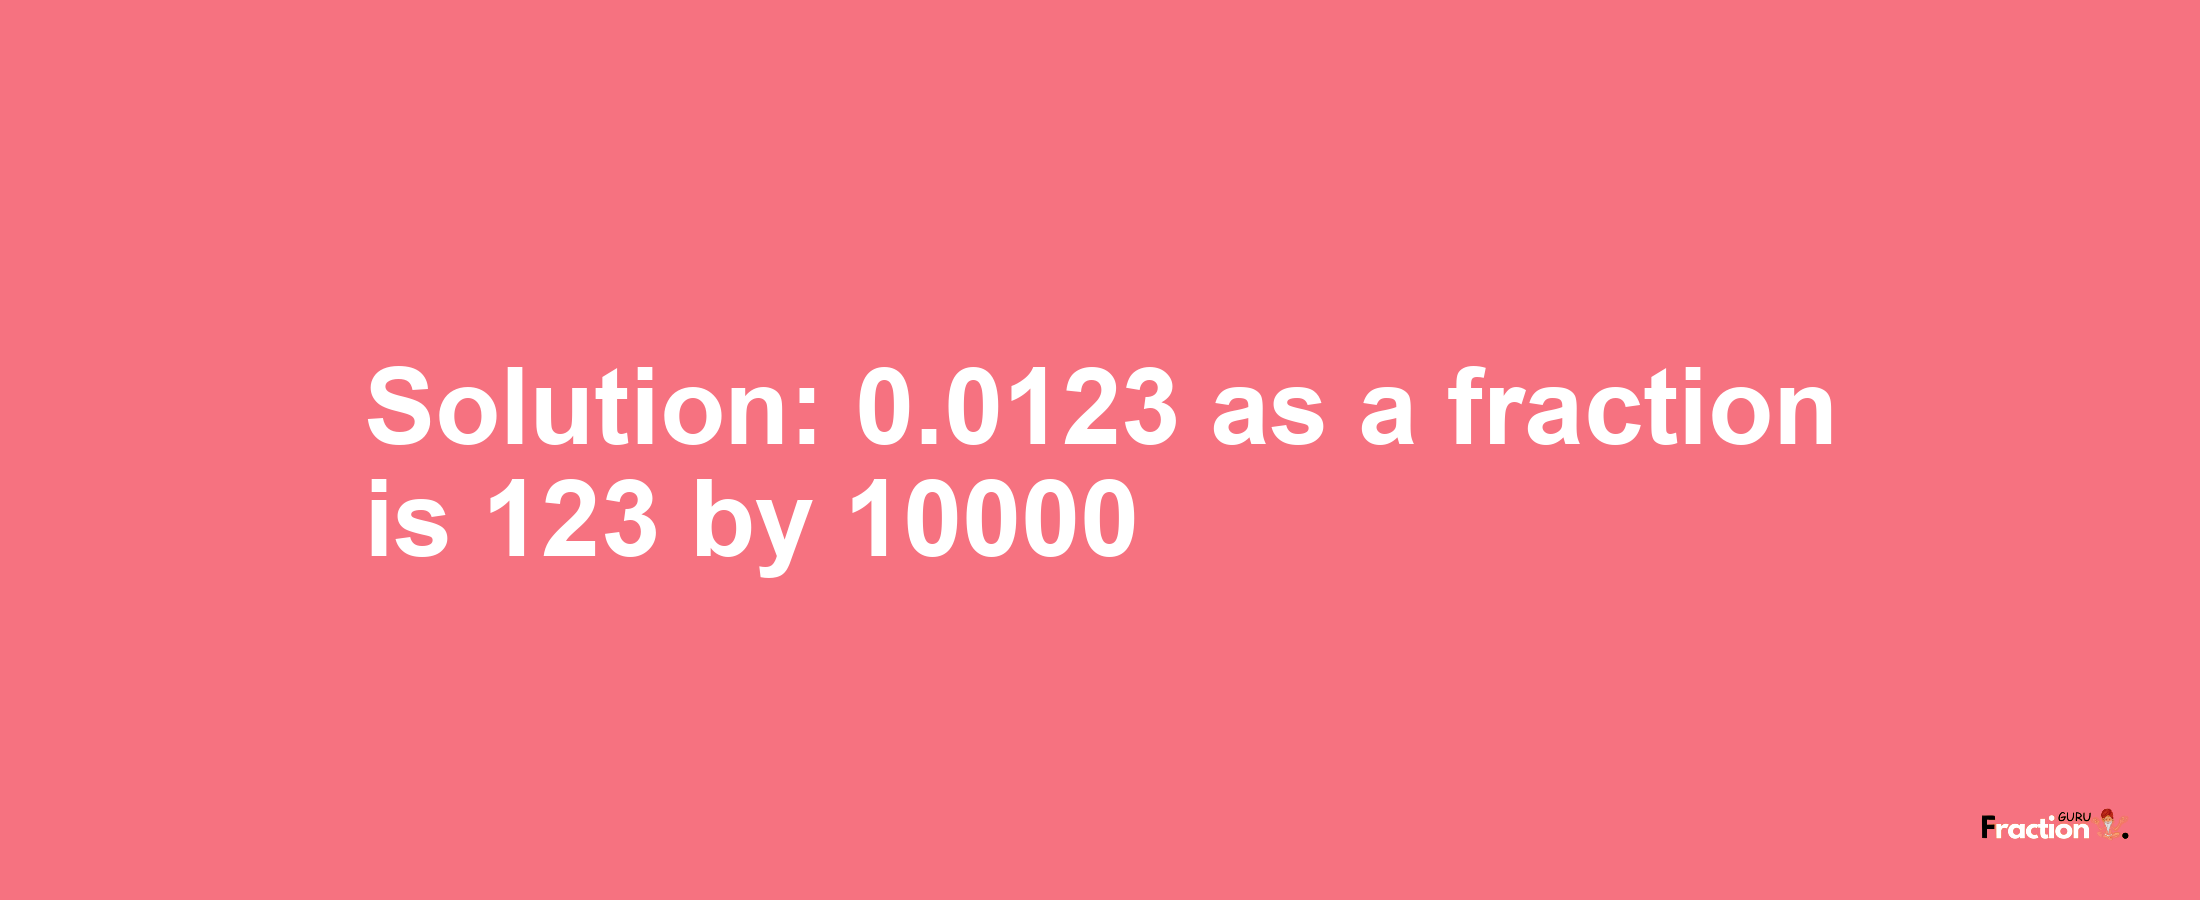 Solution:0.0123 as a fraction is 123/10000